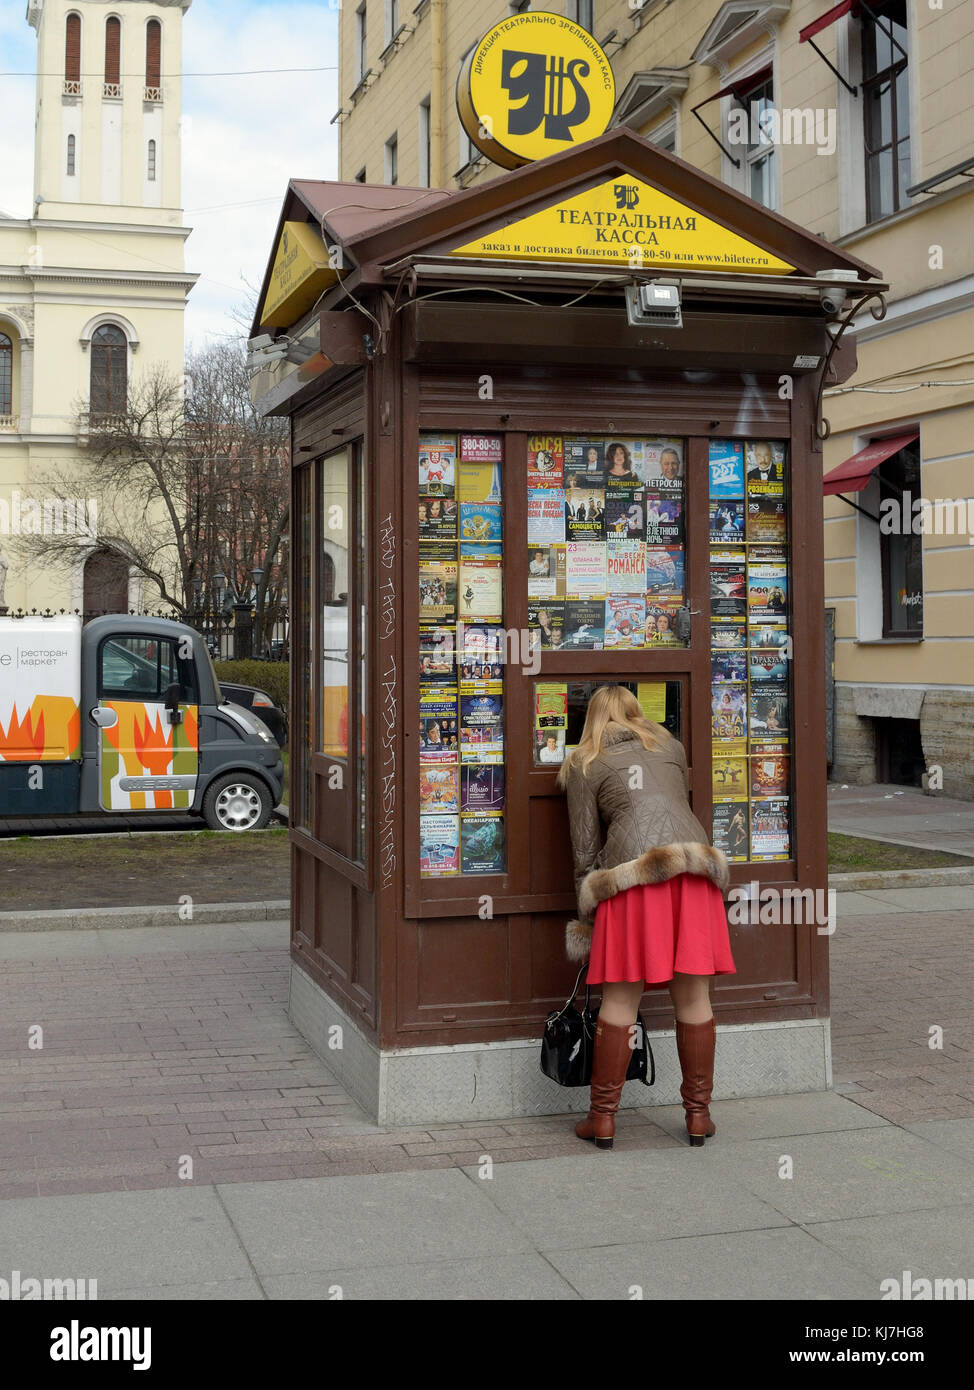 21.04.2015.Russia.Saint-Petersburg.A woman buys a ticket at the kiosk at the premiere of a new play. Stock Photo